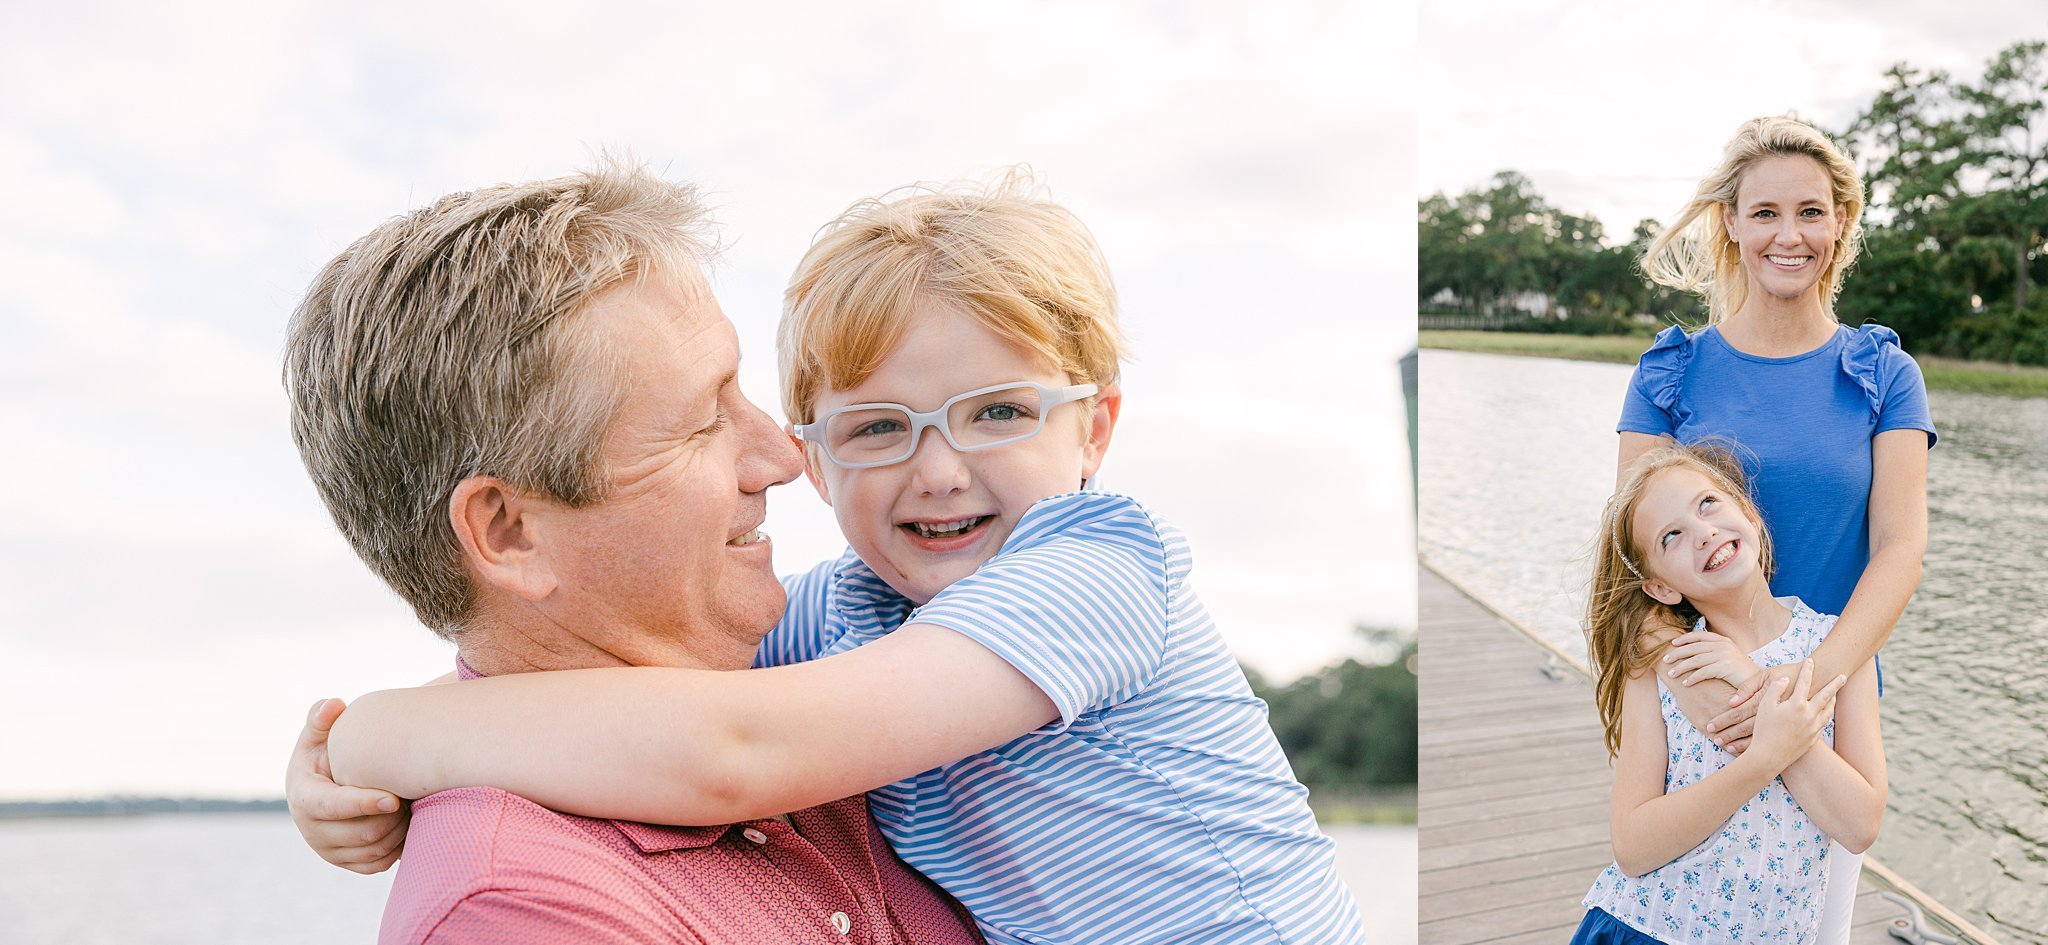 Katherine_Ives_Photography_Patton_Family_Montage_Palmetto_Bluff_10255.JPG